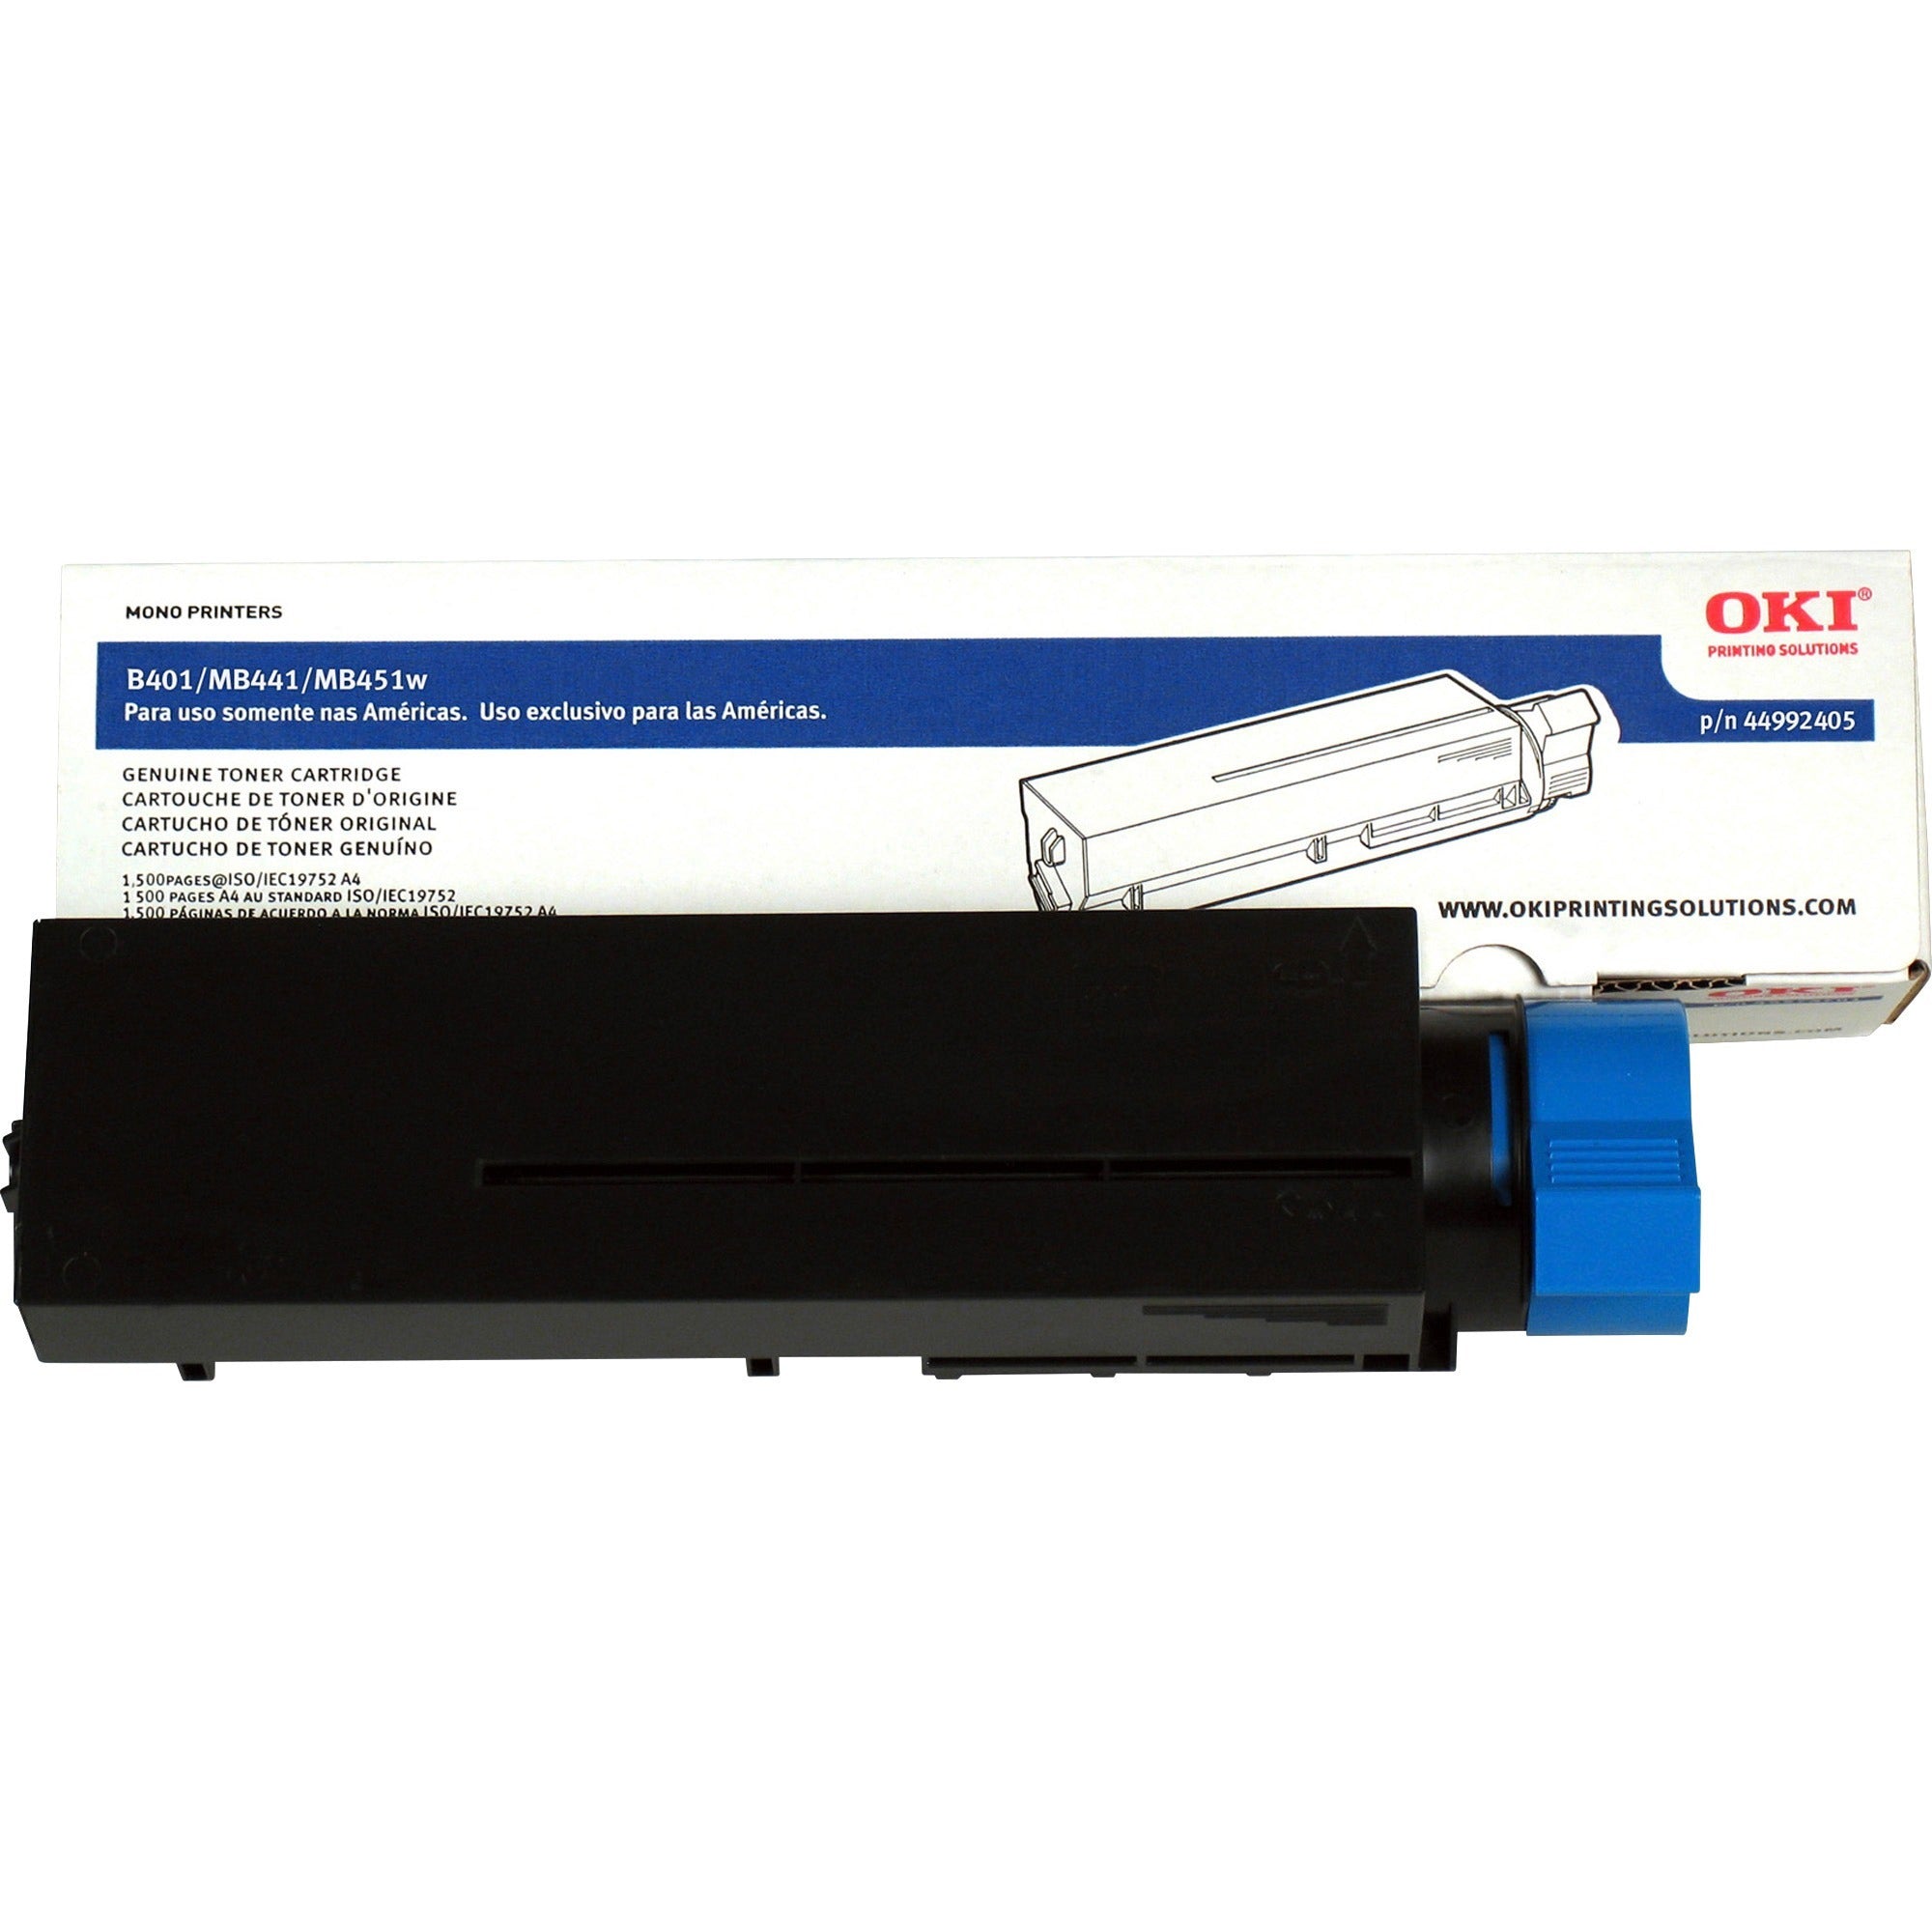 44992405 Toner, 1500 Page-Yield, Black, Sold as 1 Each - 1